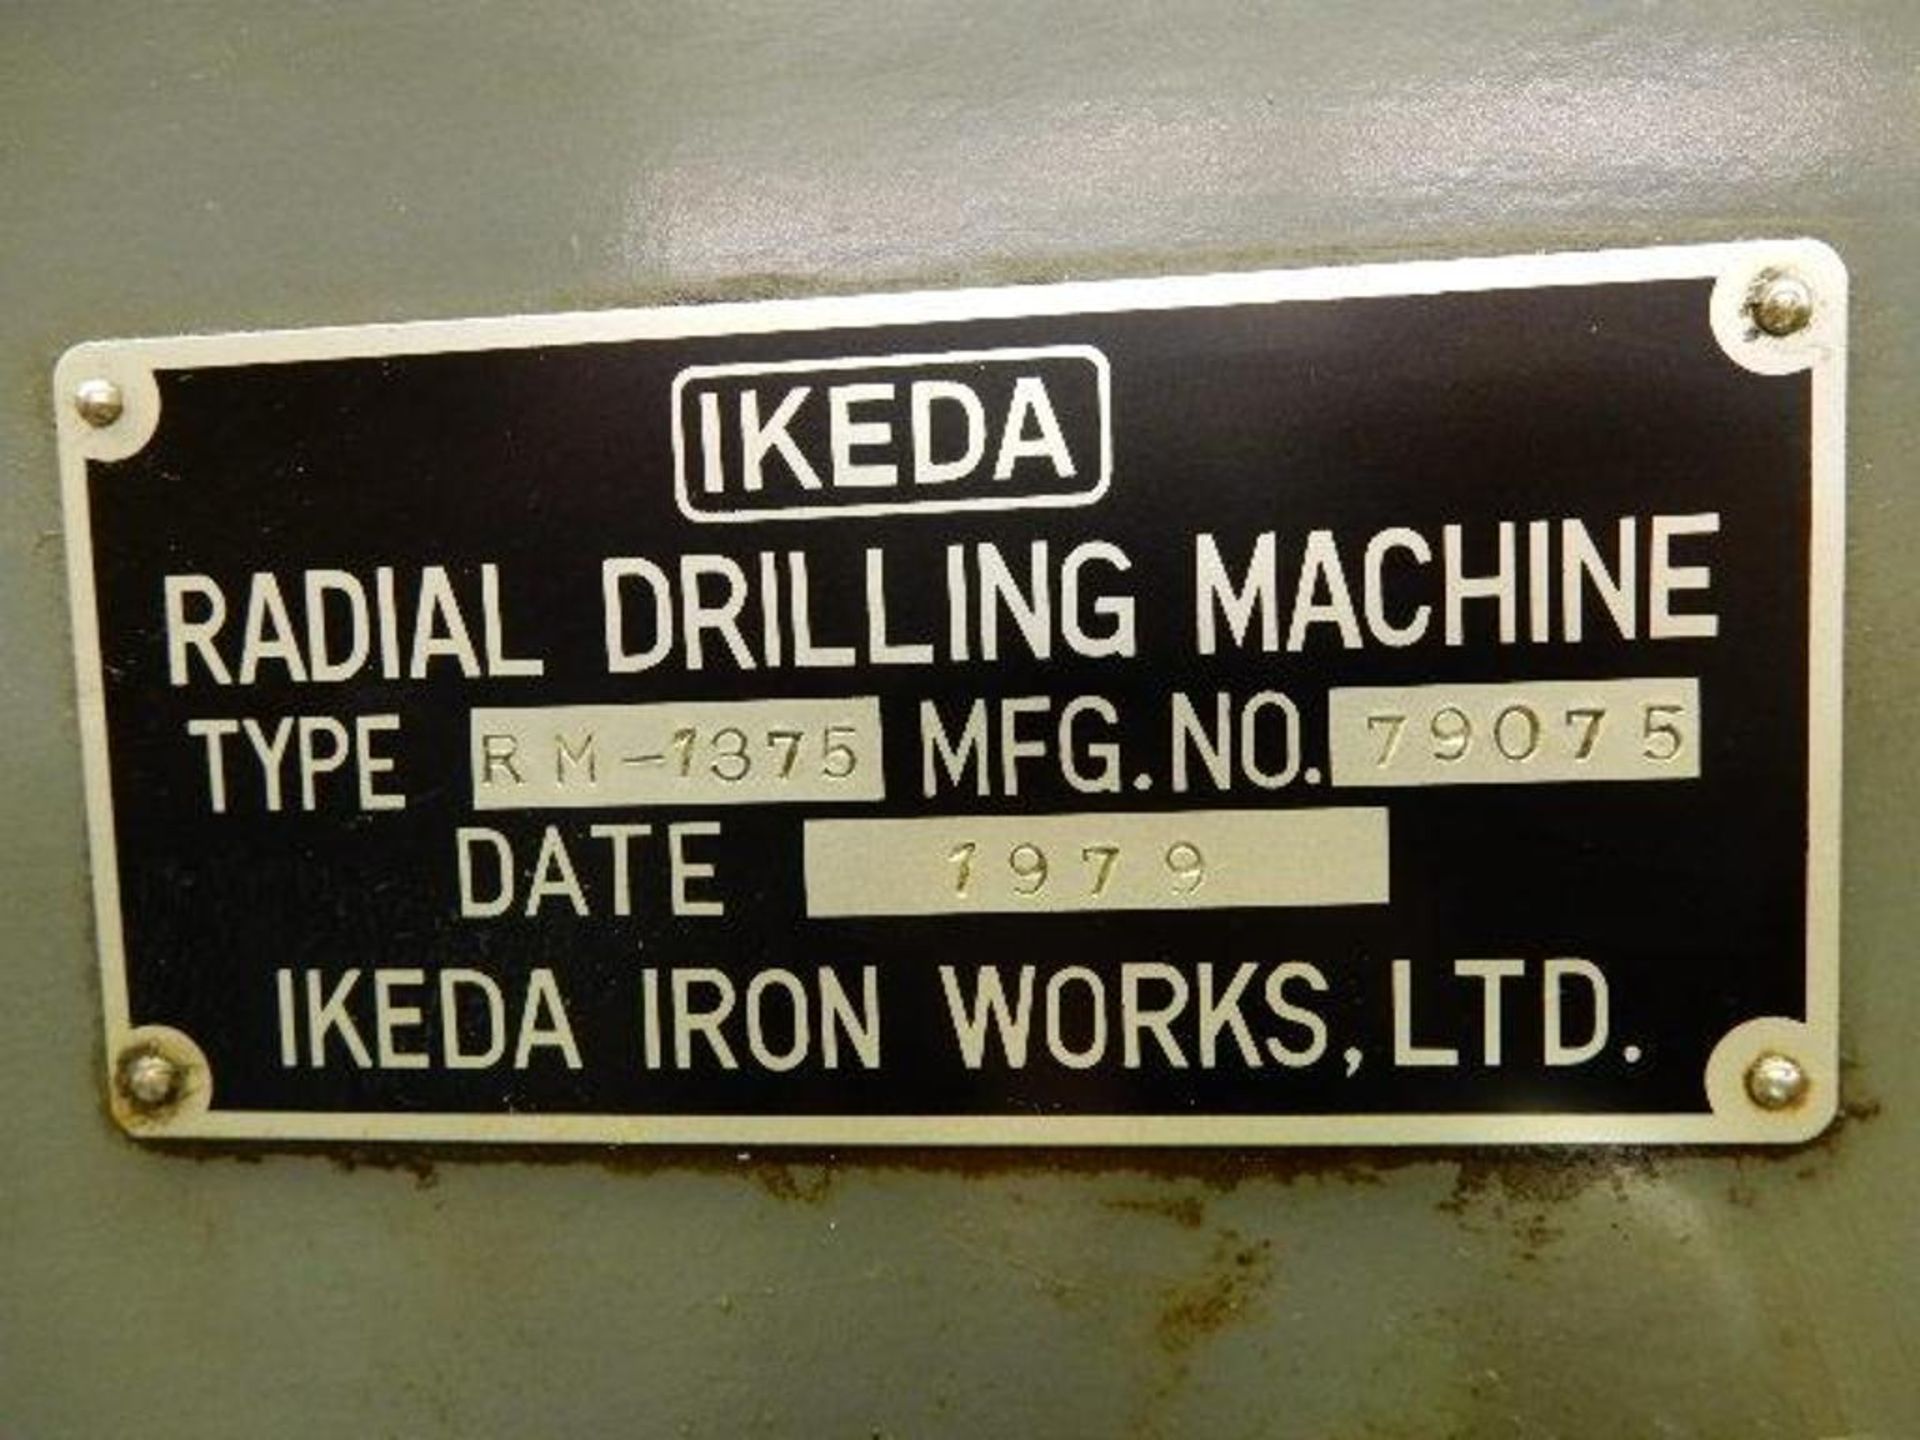 Ikeda Model RM-1375 Radial Arm Drill, 13" Column, 5' Arm, 30-1500 RPM Spindle Speeds, 26.5" - Image 27 of 27